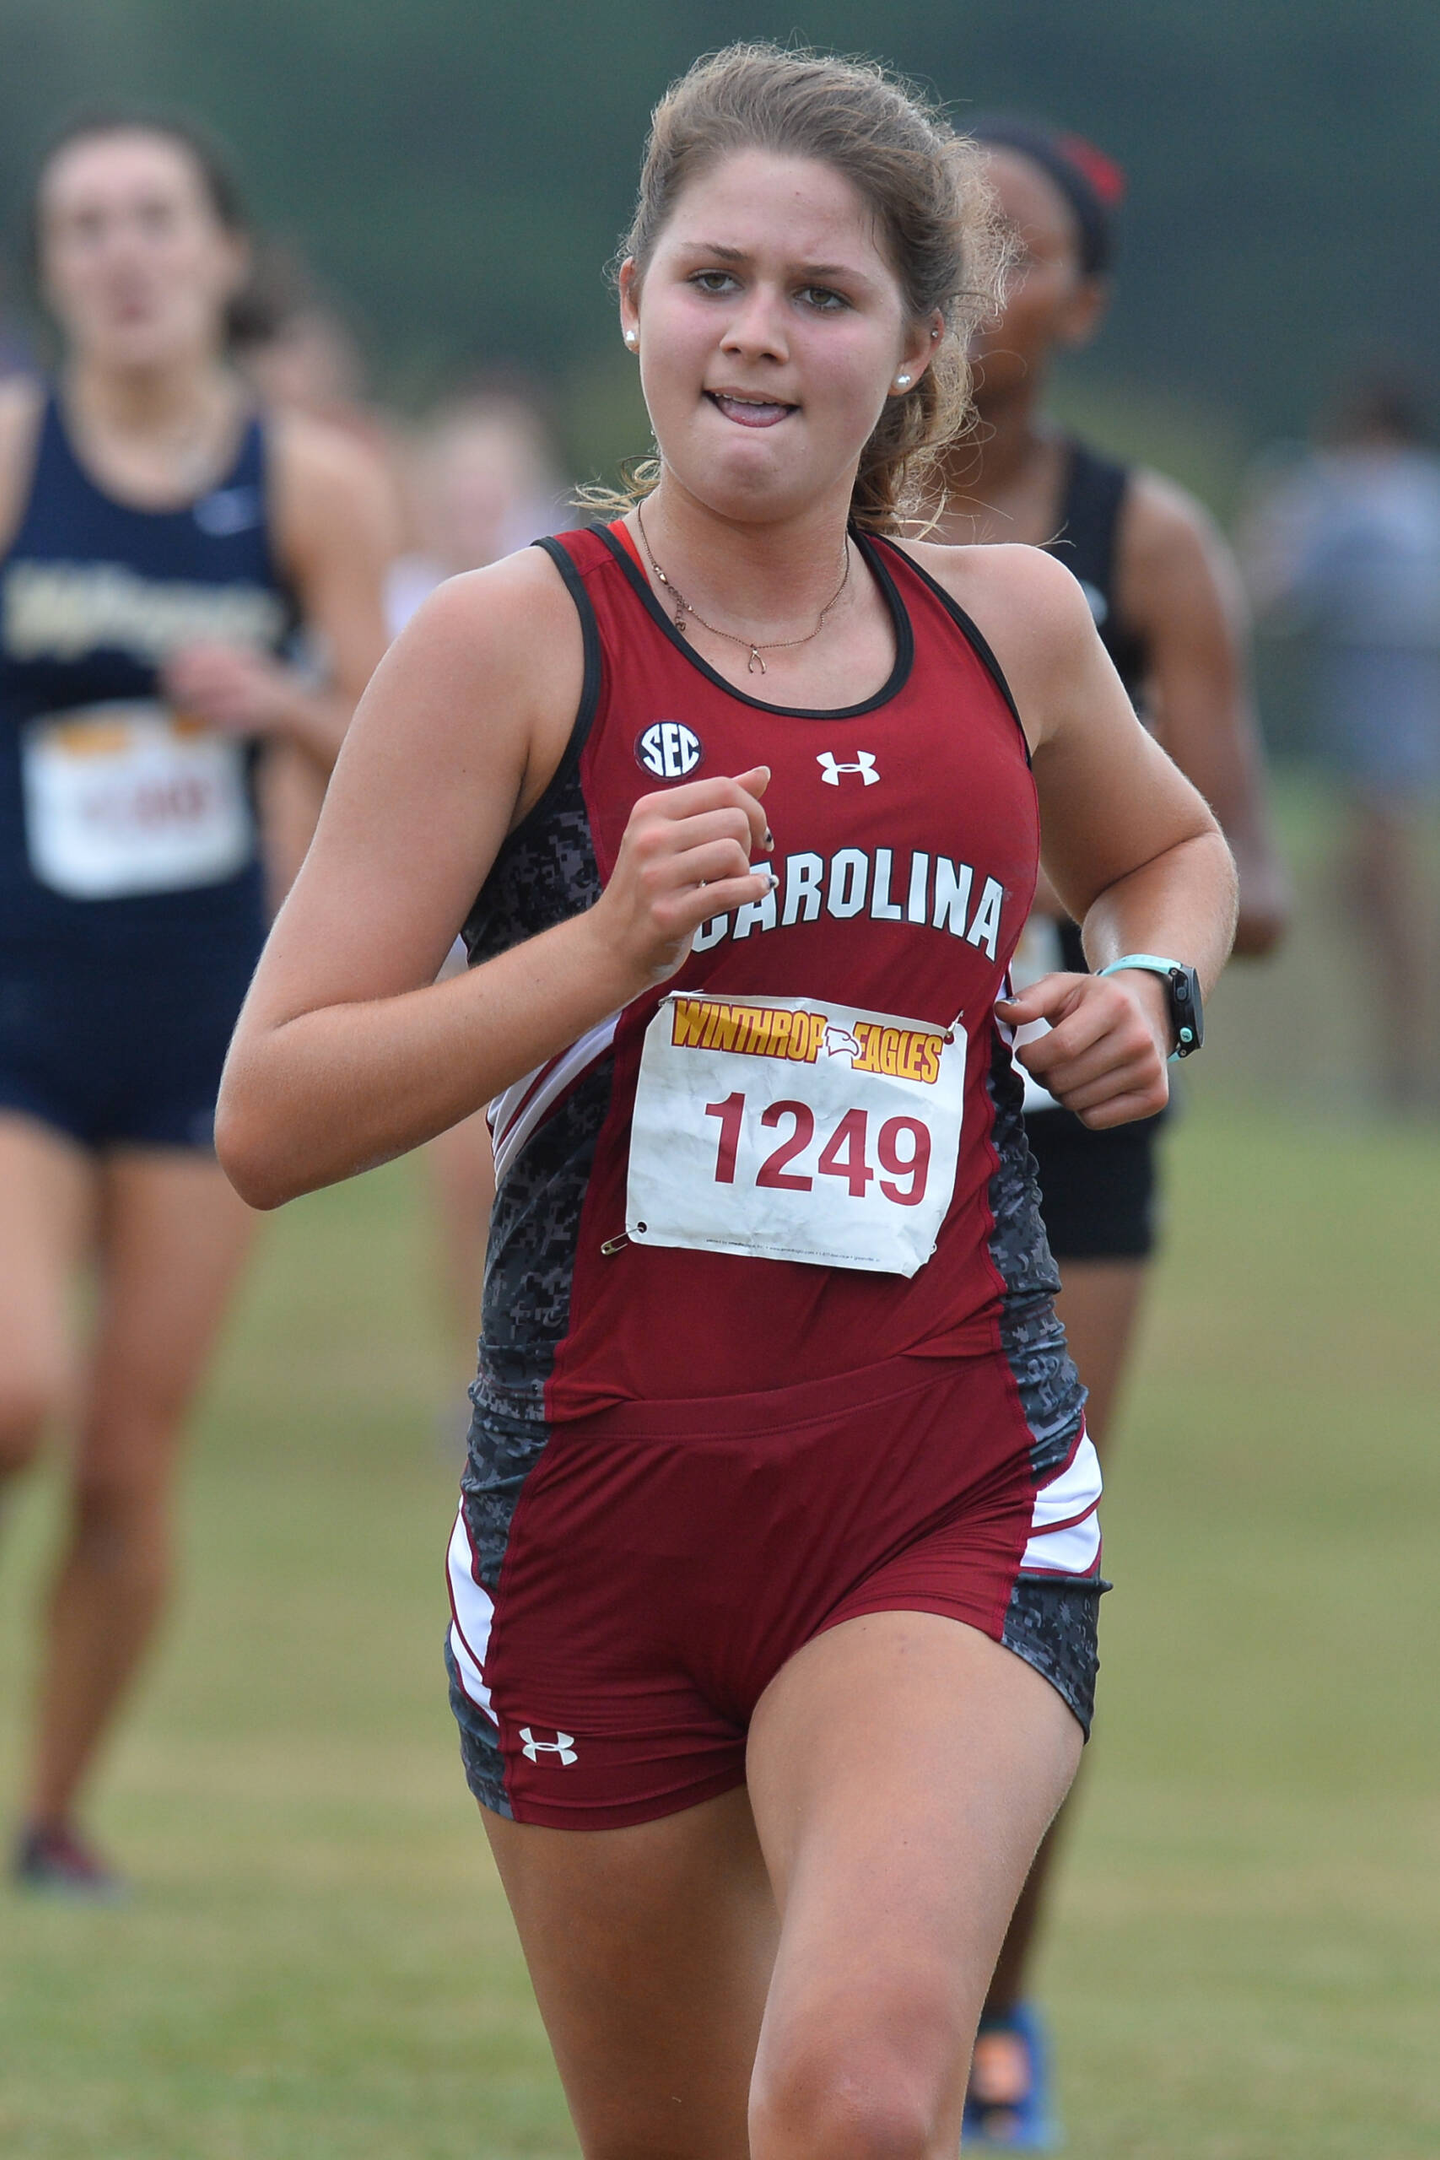 Cross Country at 2016 Winthrop Invitational